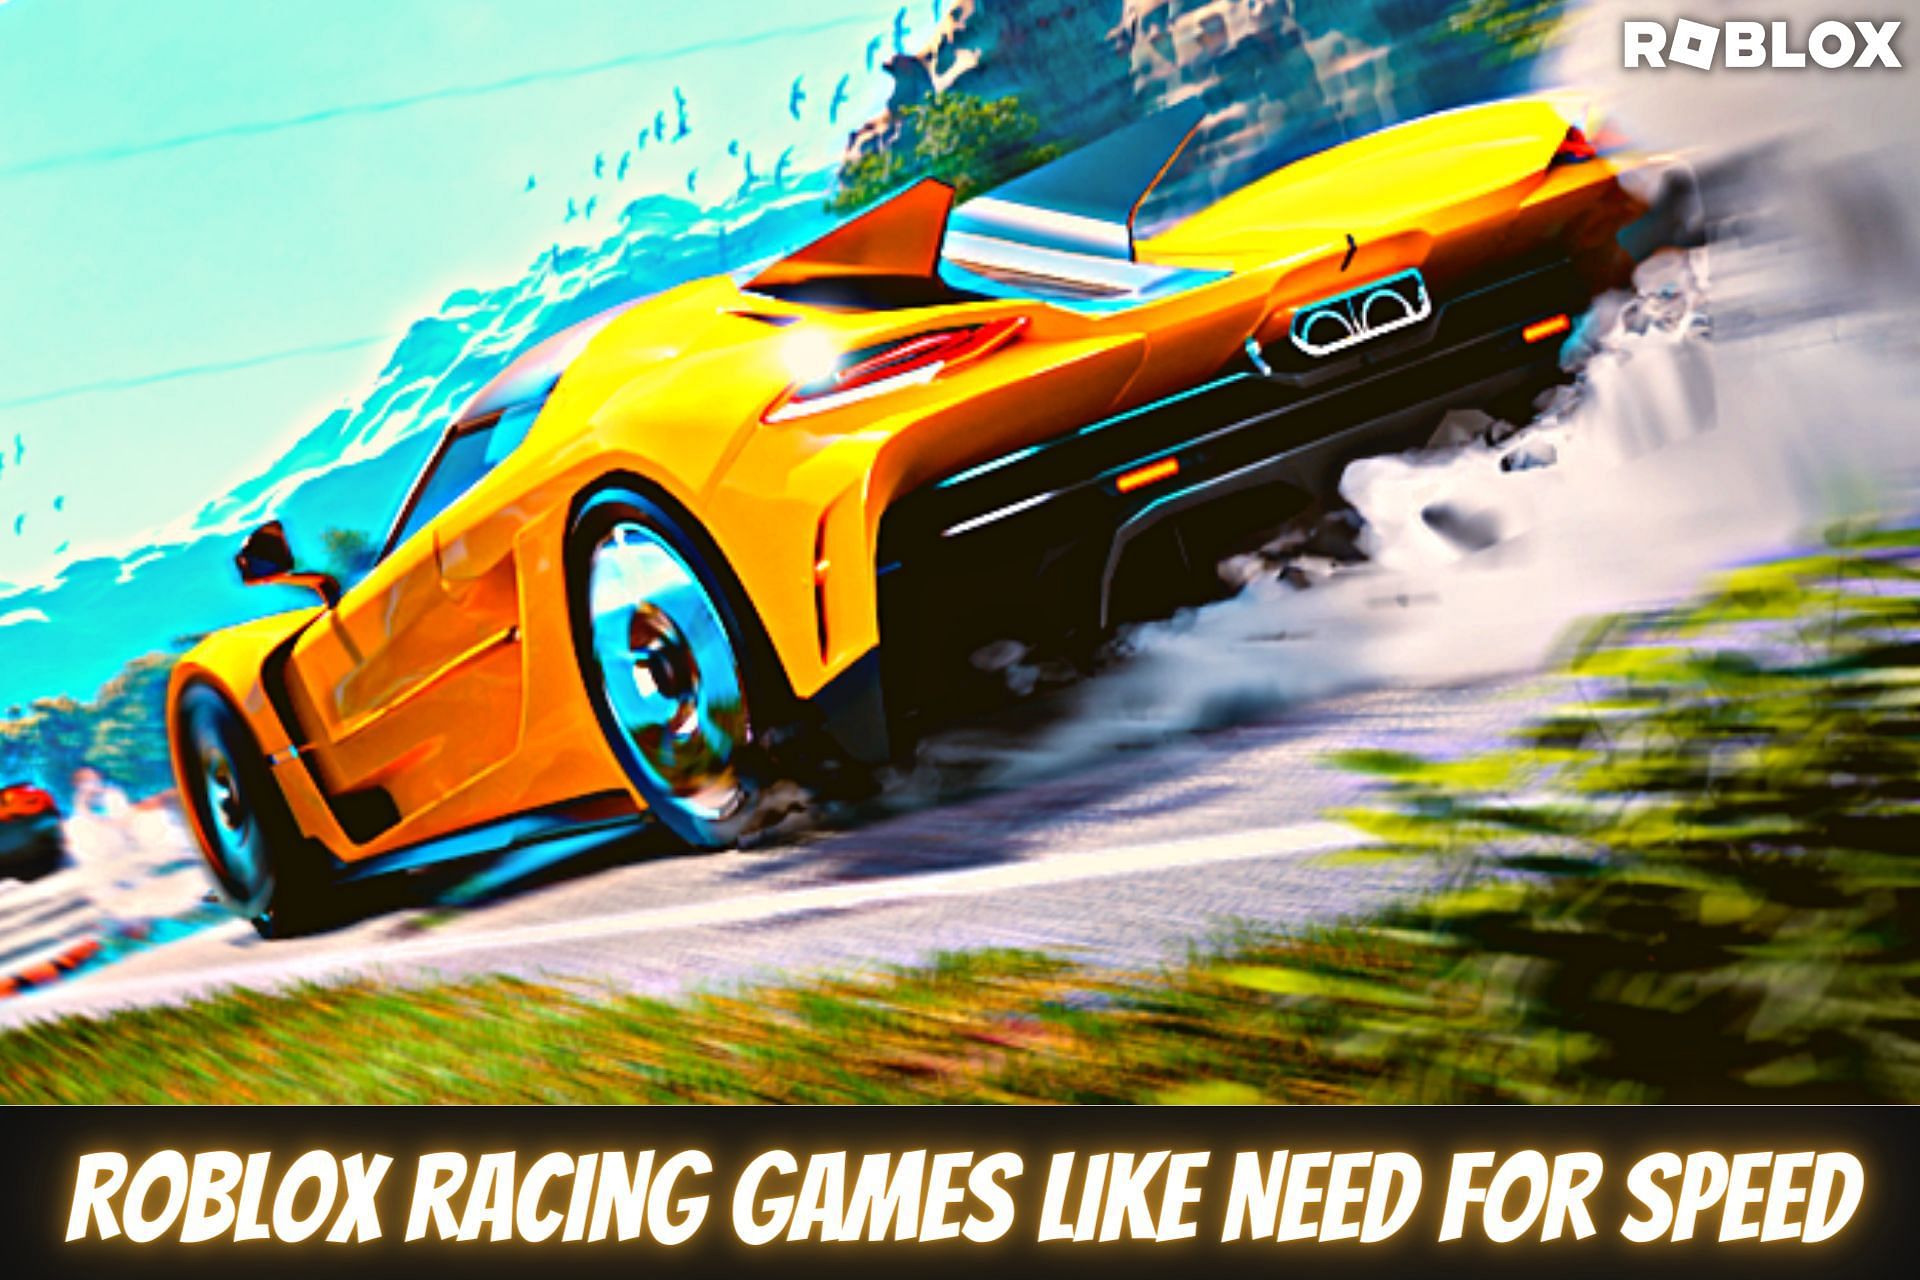 Roblox racing games like Need For Speed